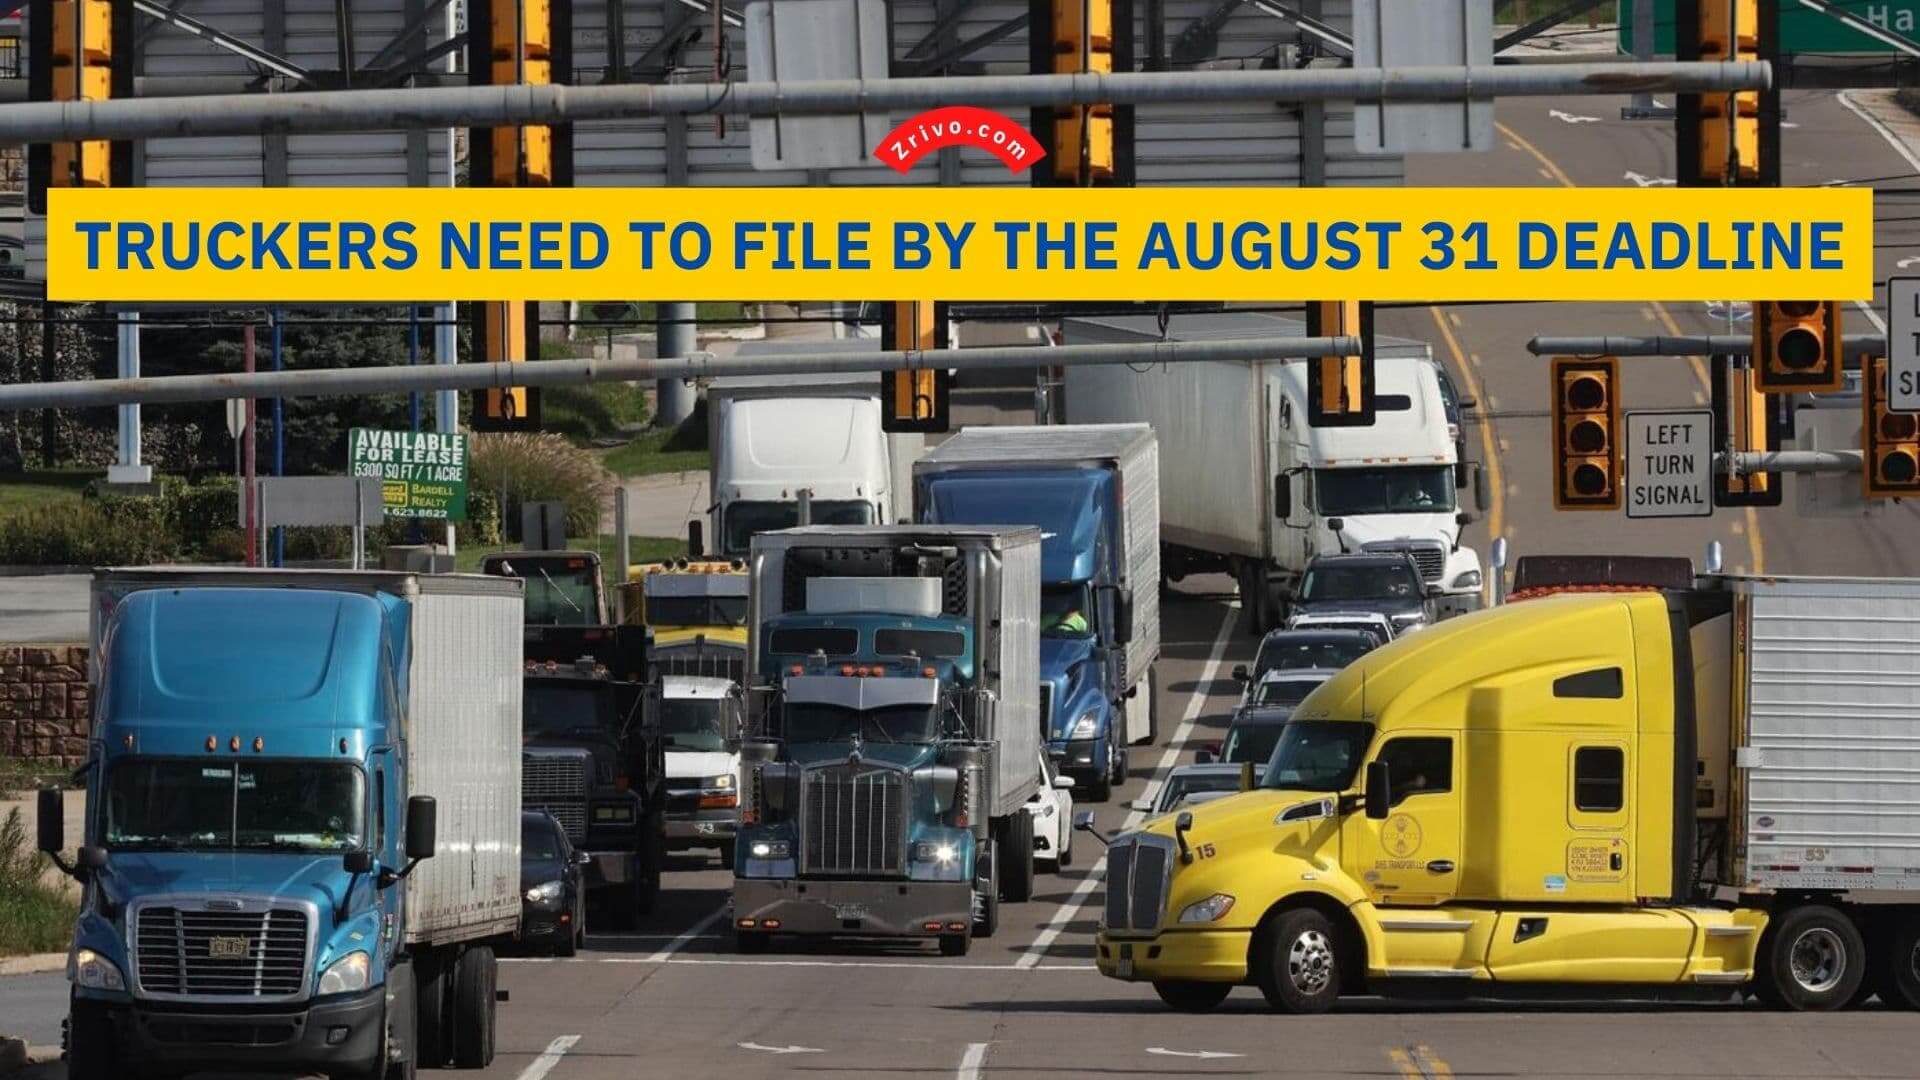 Truckers Need to File by the August 31 Deadline